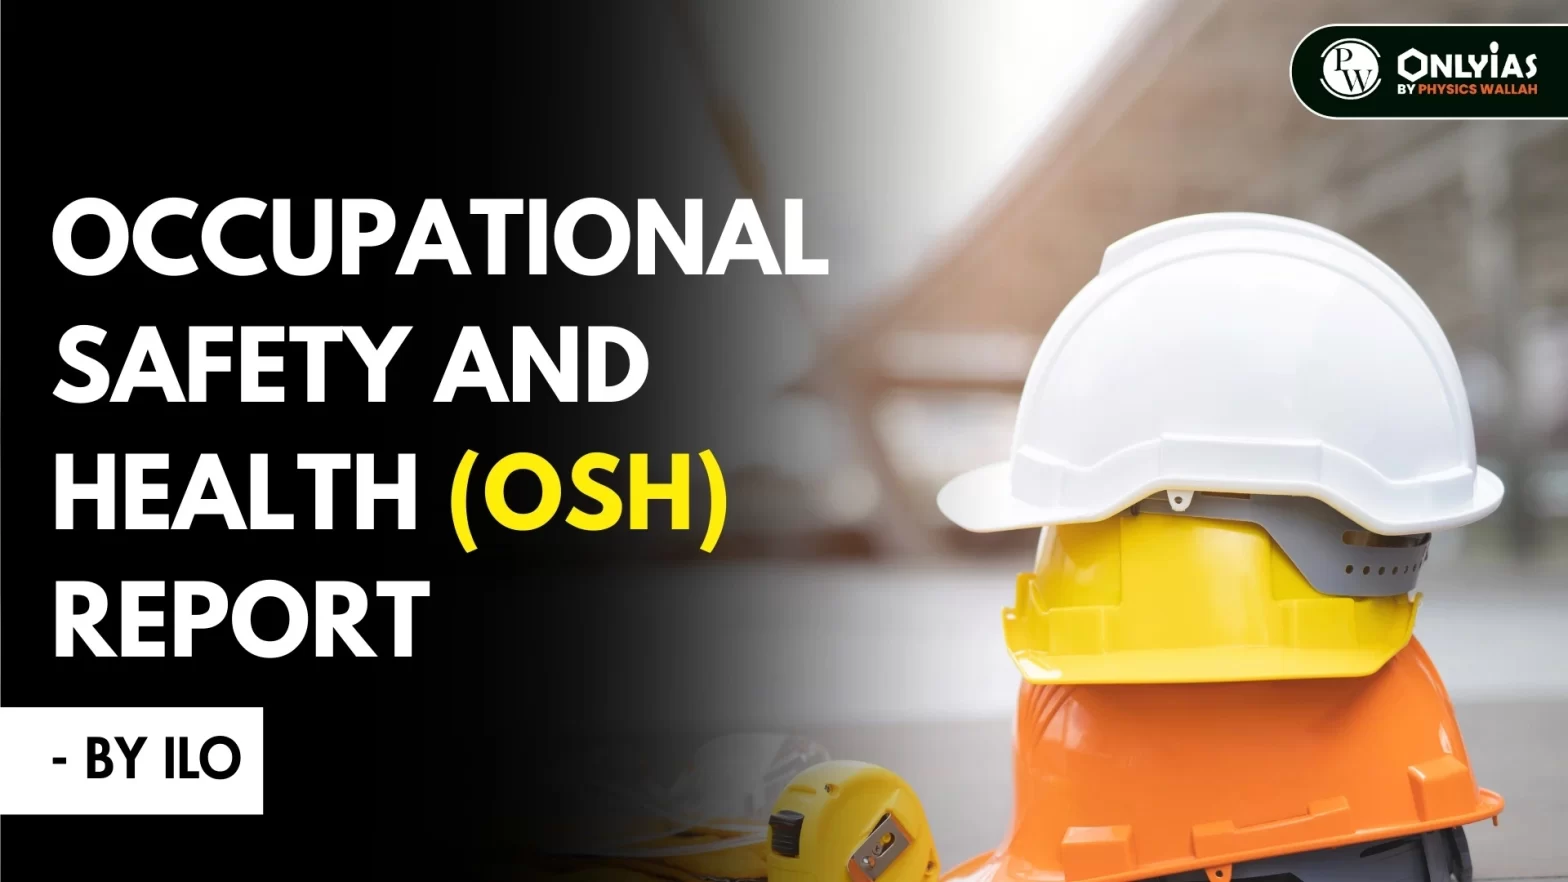 Occupational Safety and Health (OSH) Report – By ILO